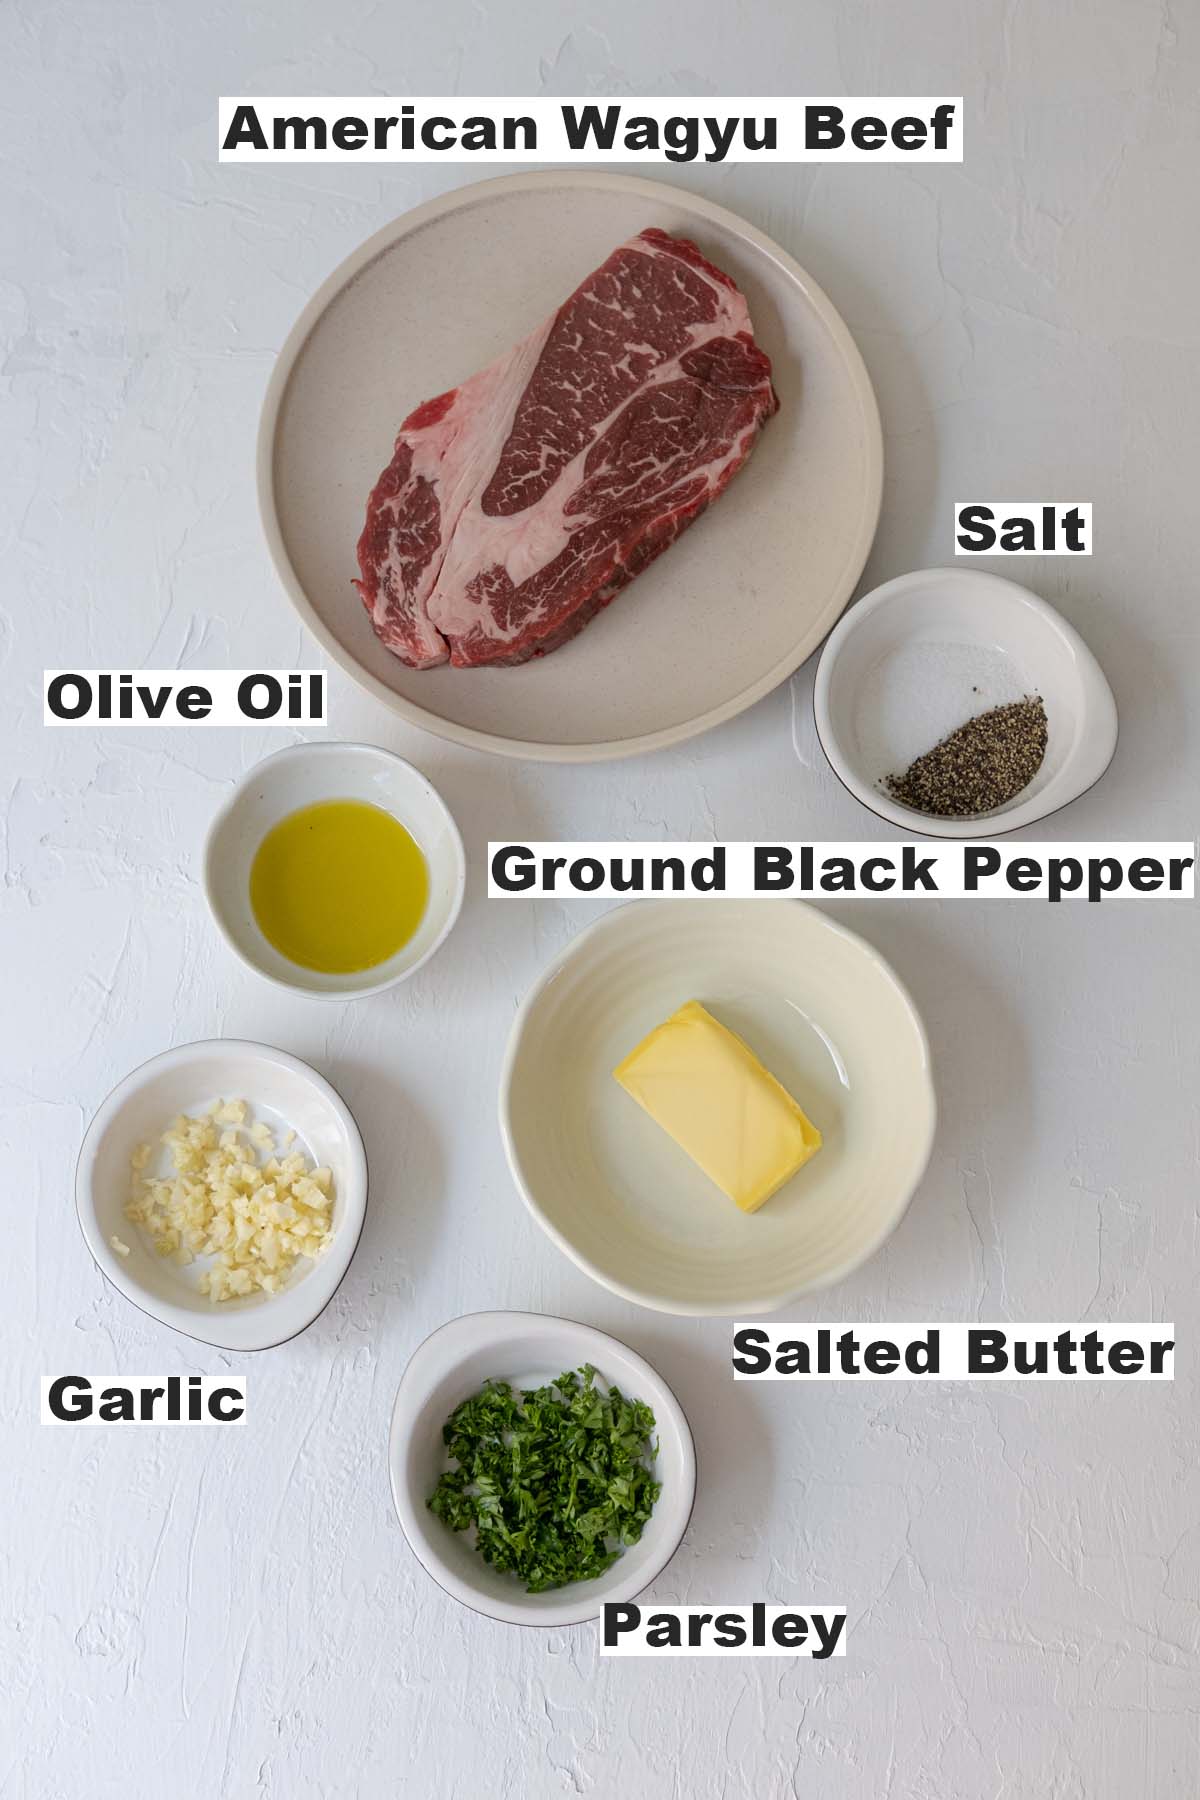 The ingredients for garlic butter wagyu beef.